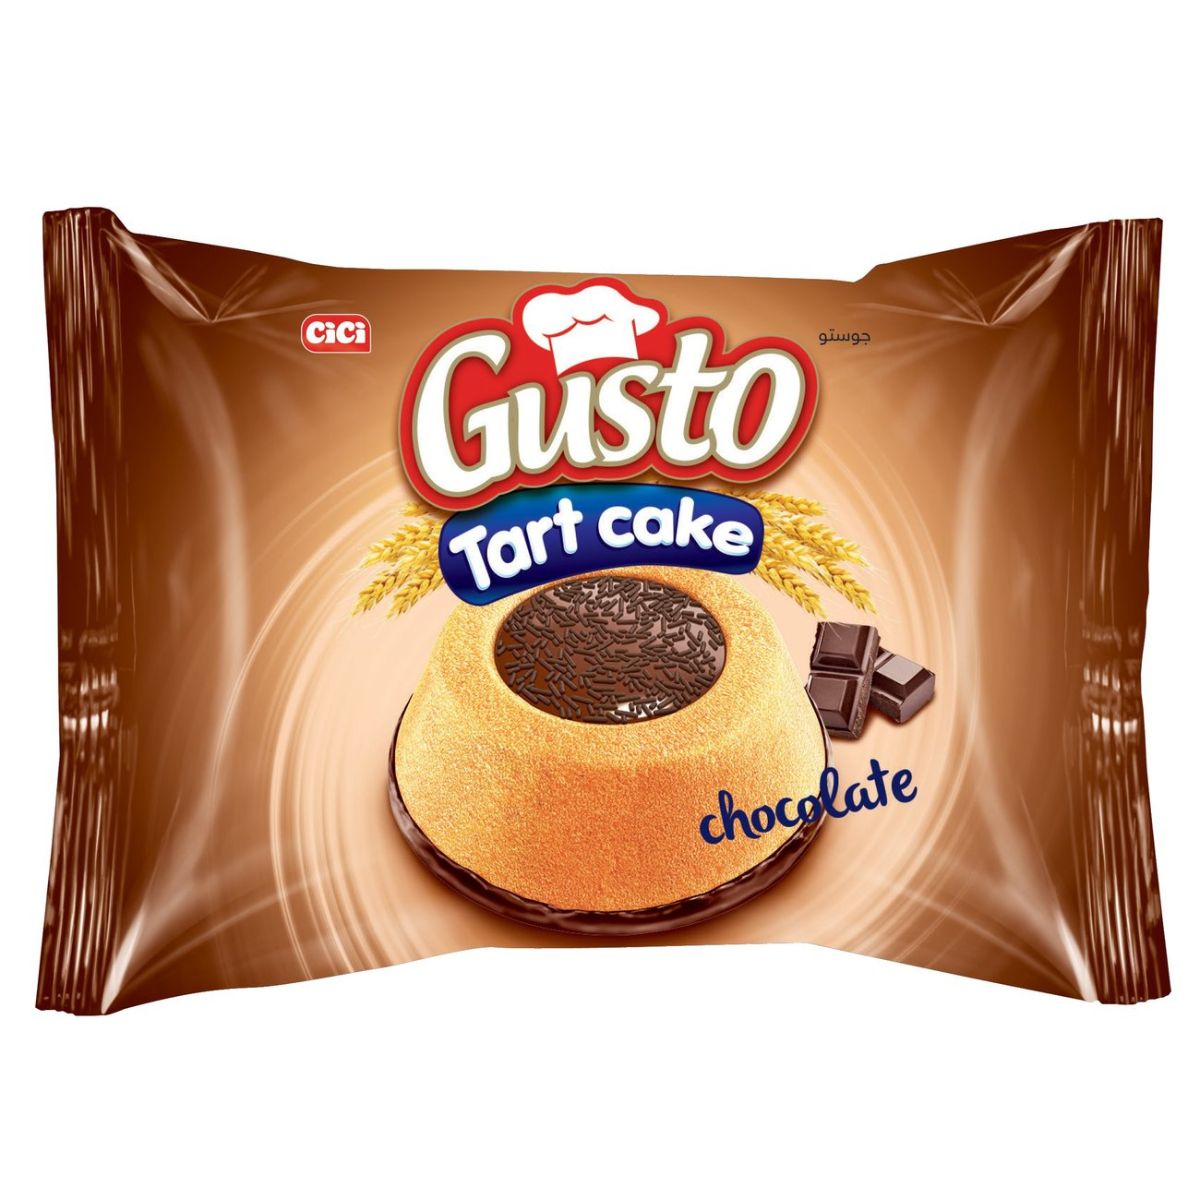 Gusto - Tart Cake Chocolate Cream - 50g - replaced the product name in the sentence.